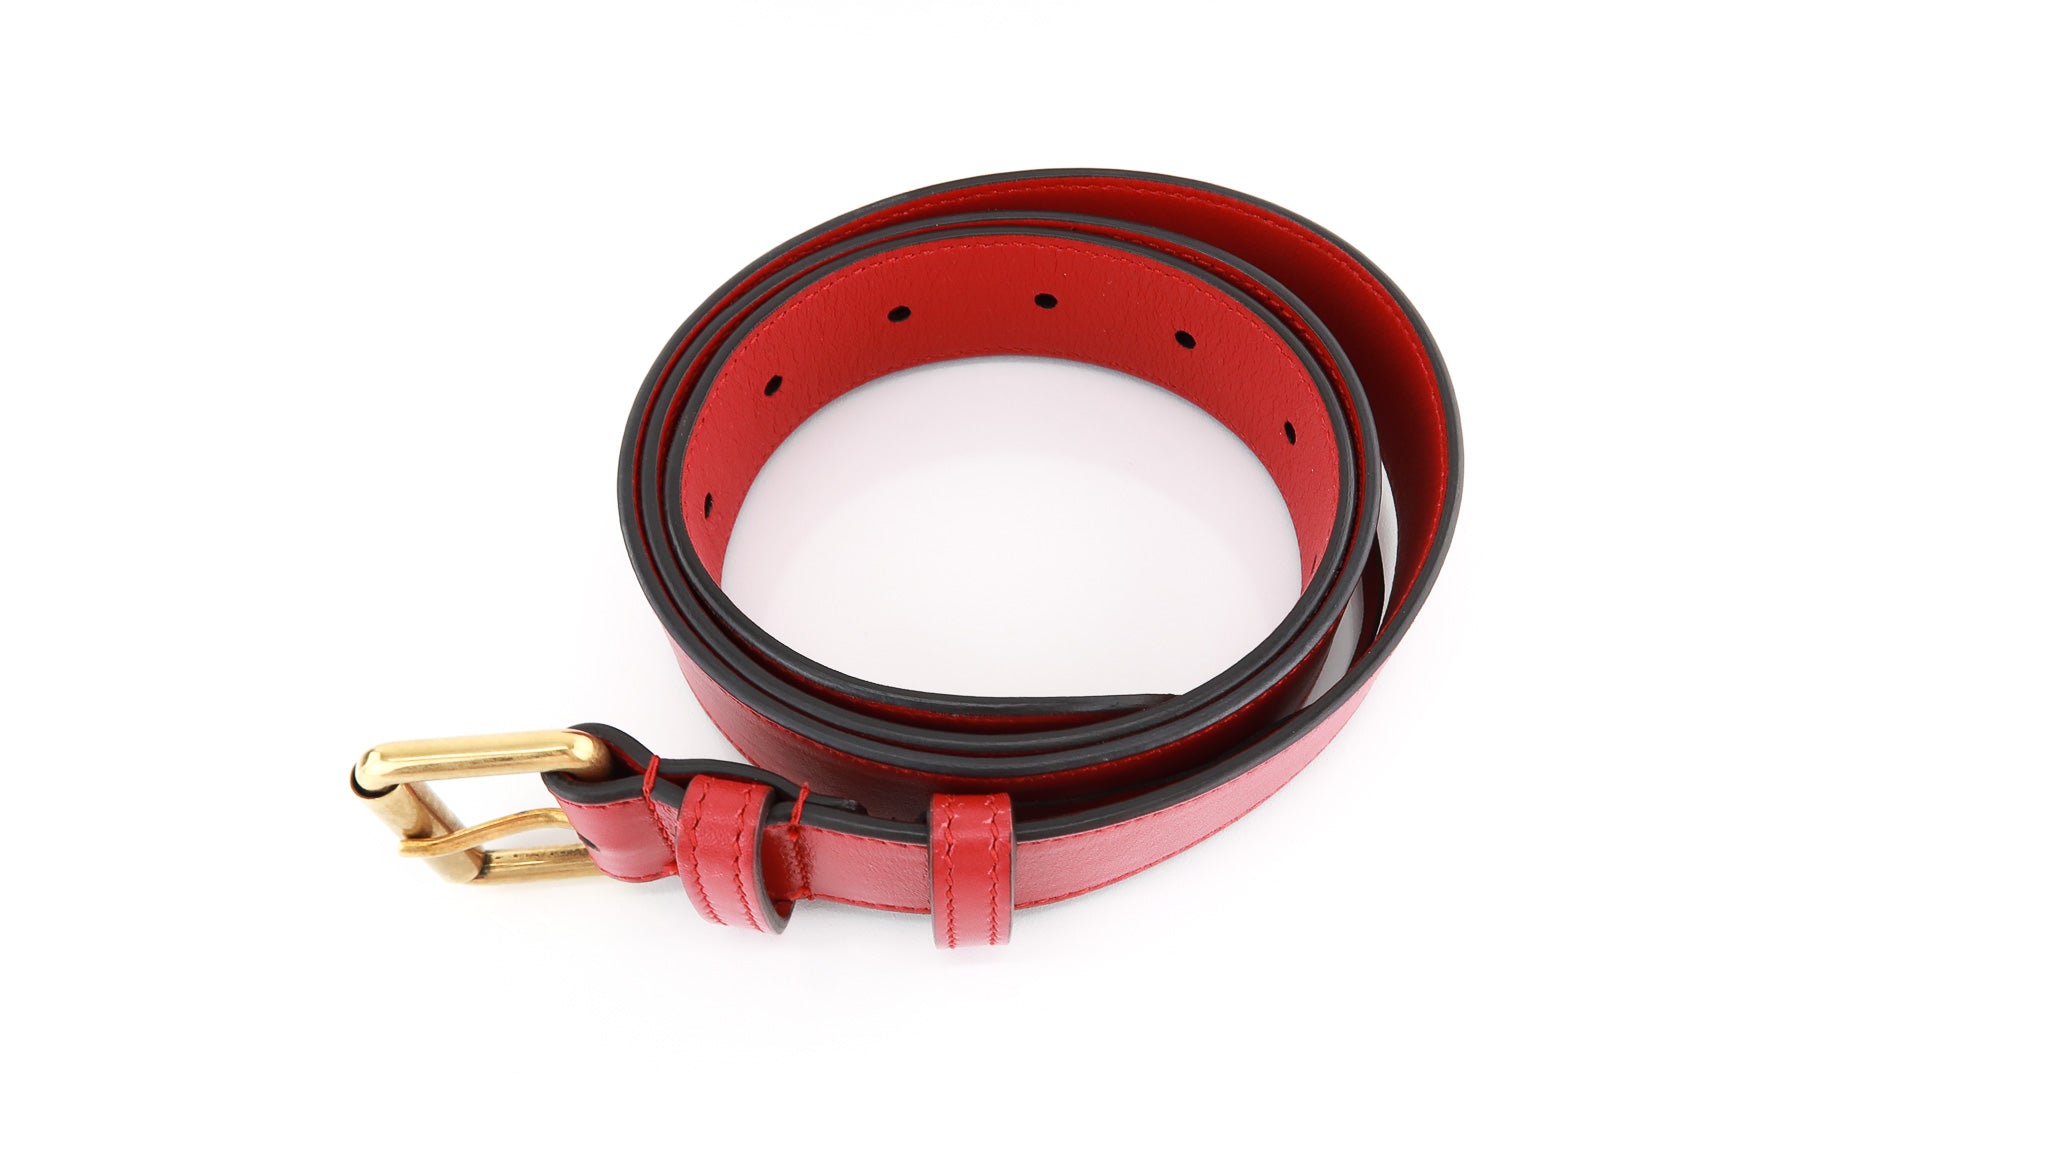 Gucci GG Marmont Belt Bag Matelasse Hibiscus Red in Leather with